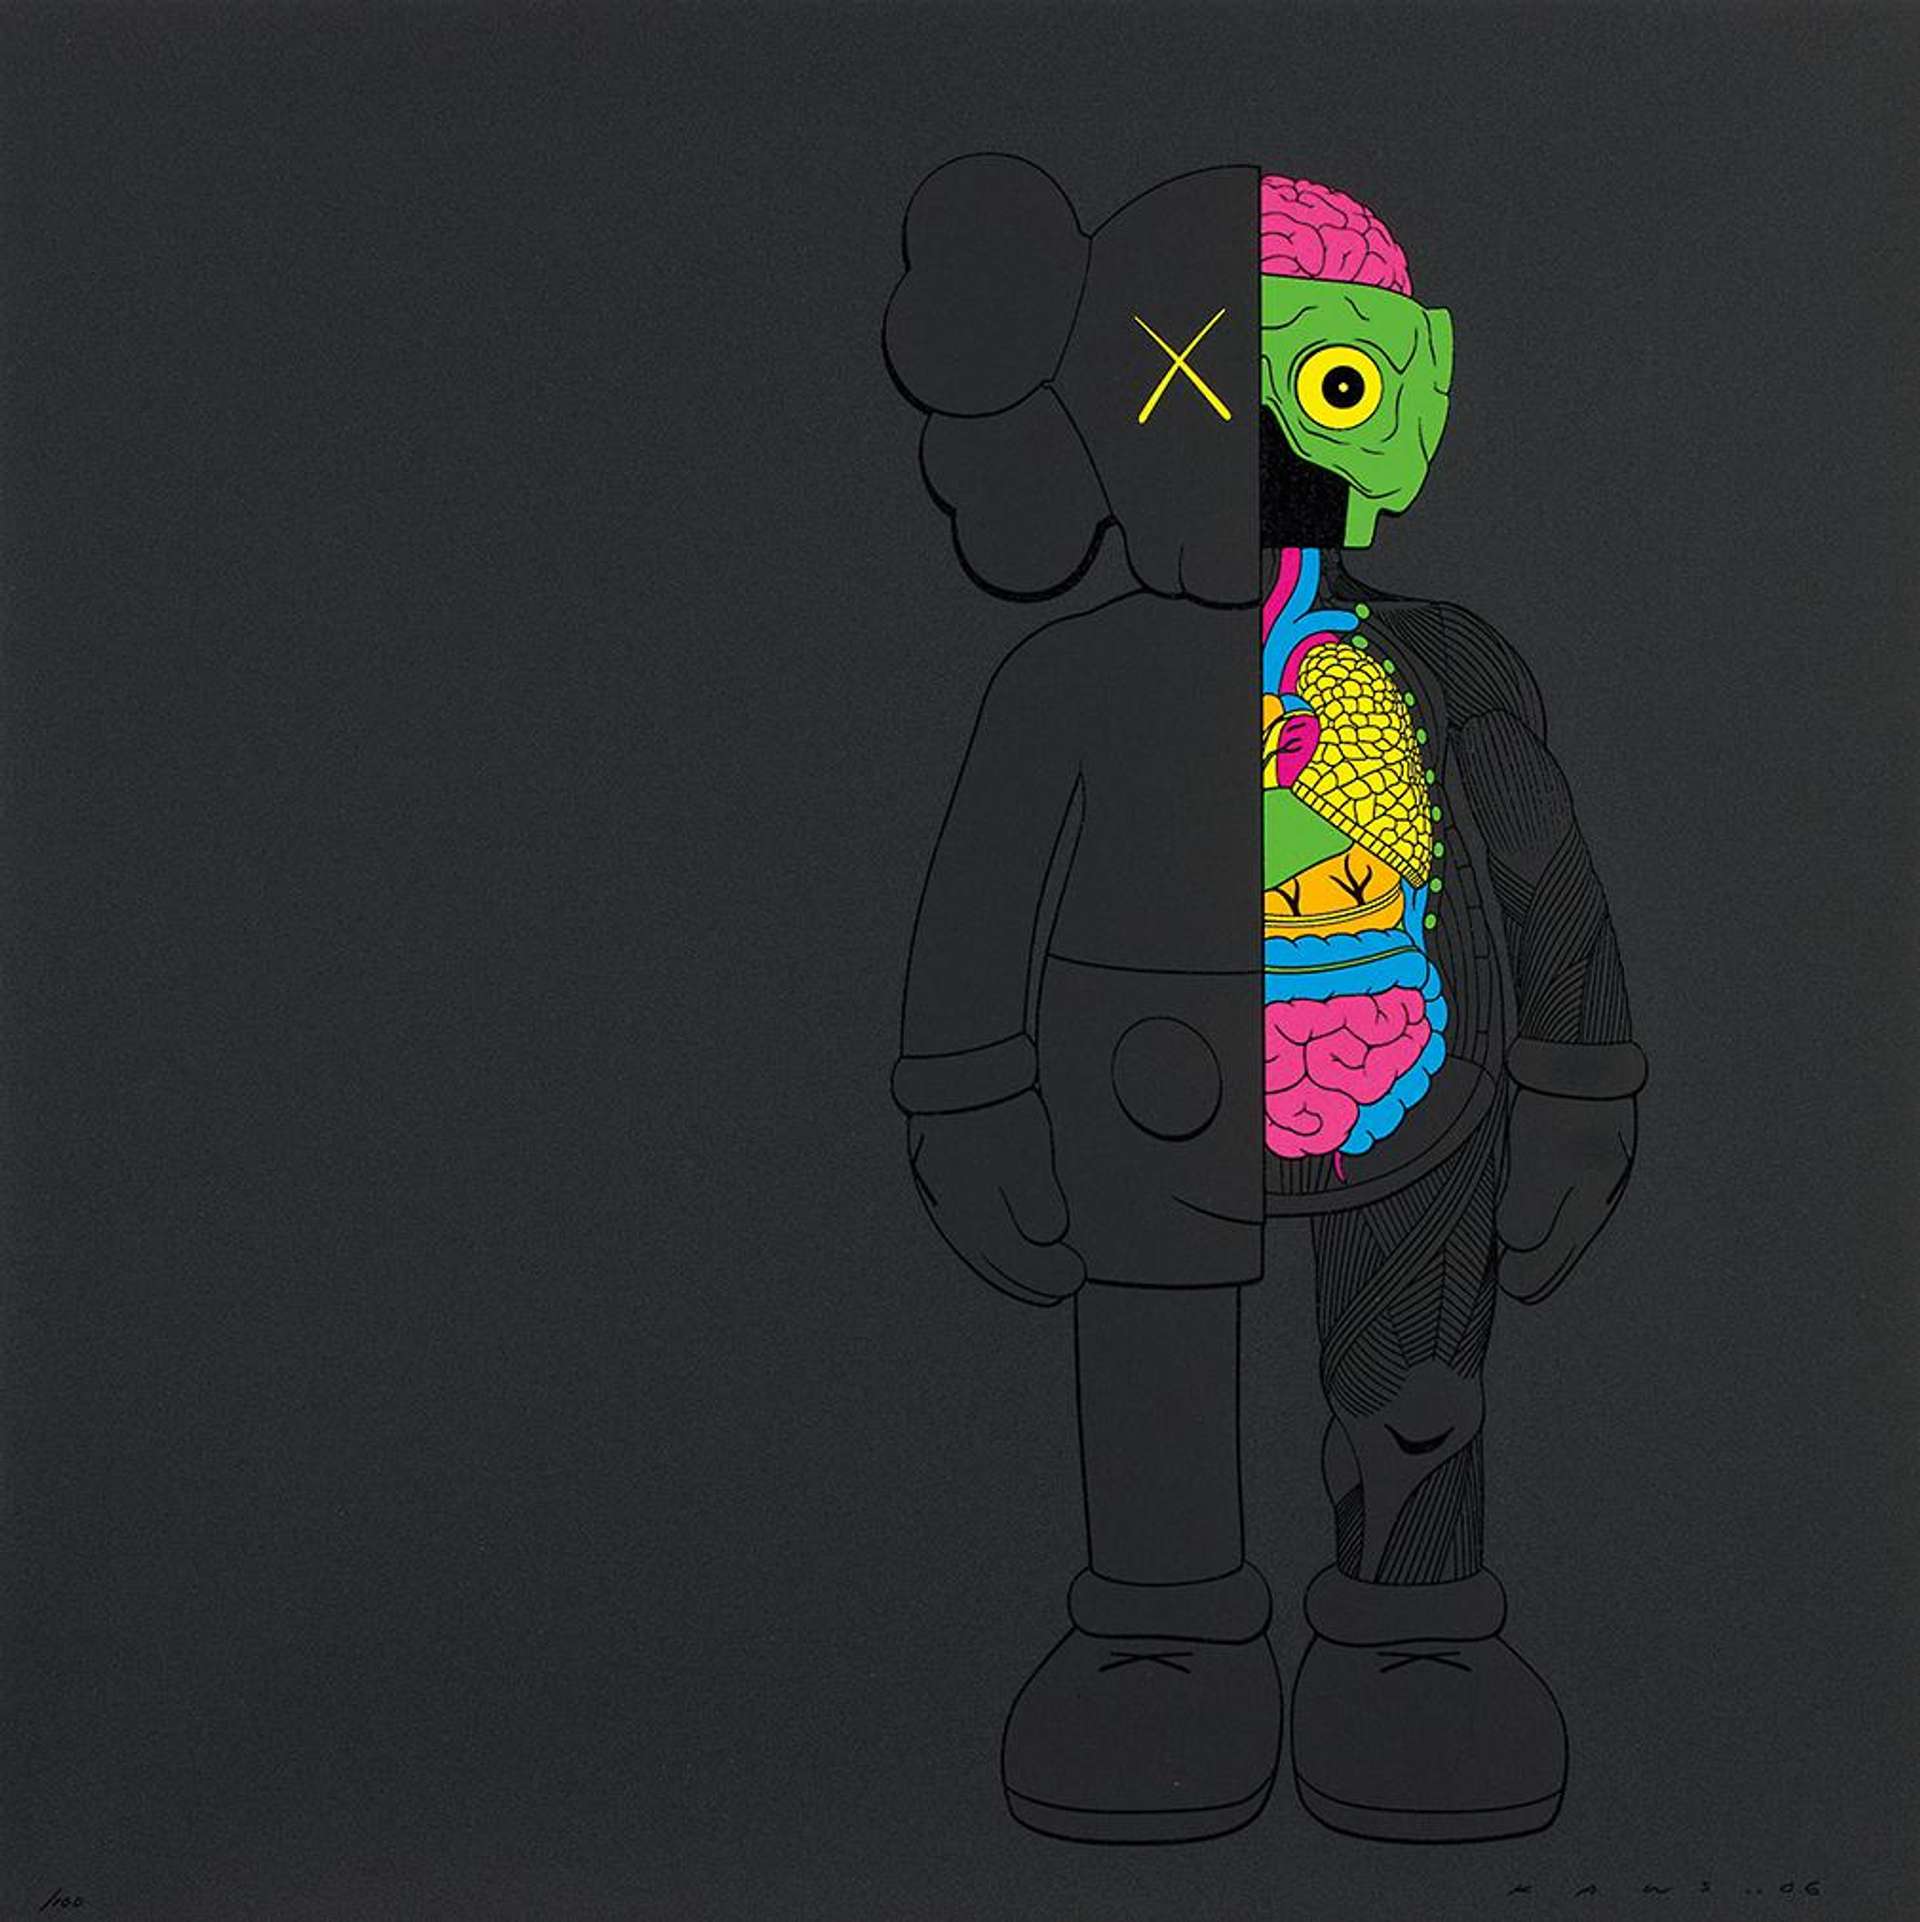 KAWS - Five Years Later Dissected Companion Brown, 2006